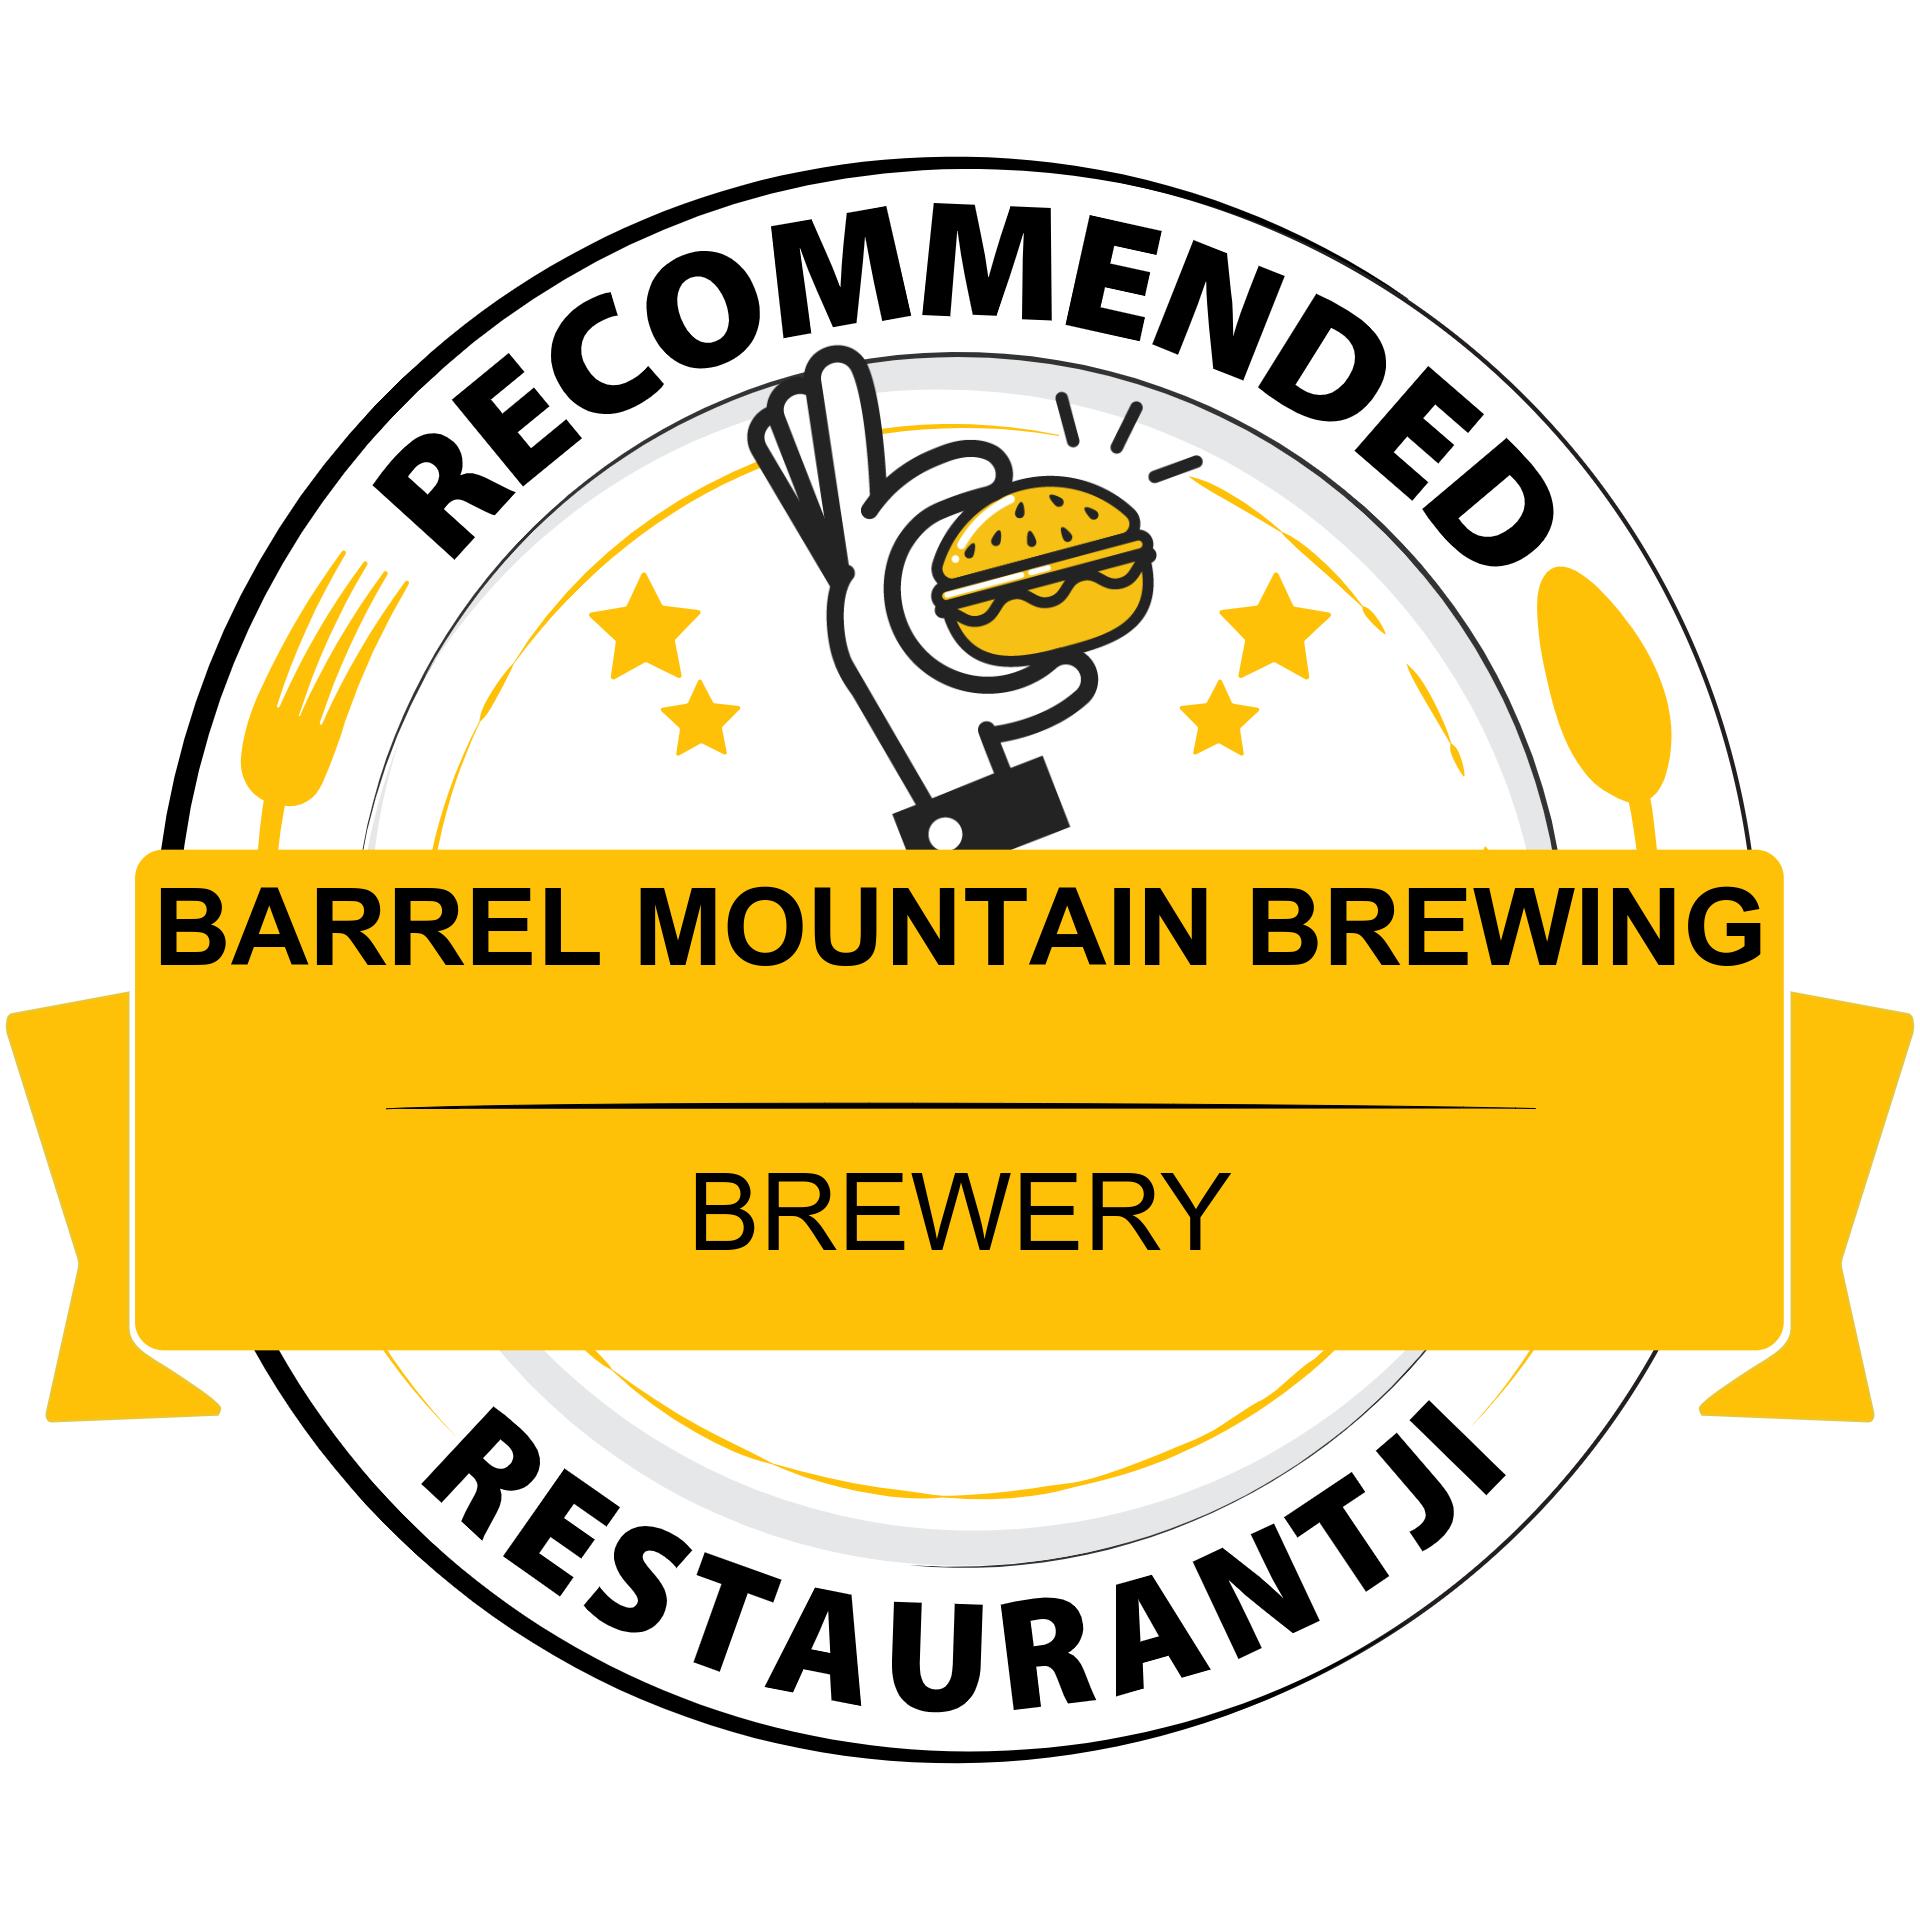 Barrel Mountain Brewing is celebrated on Restaurantji - an ultimate directory with restaurant reviews, menus and photos.